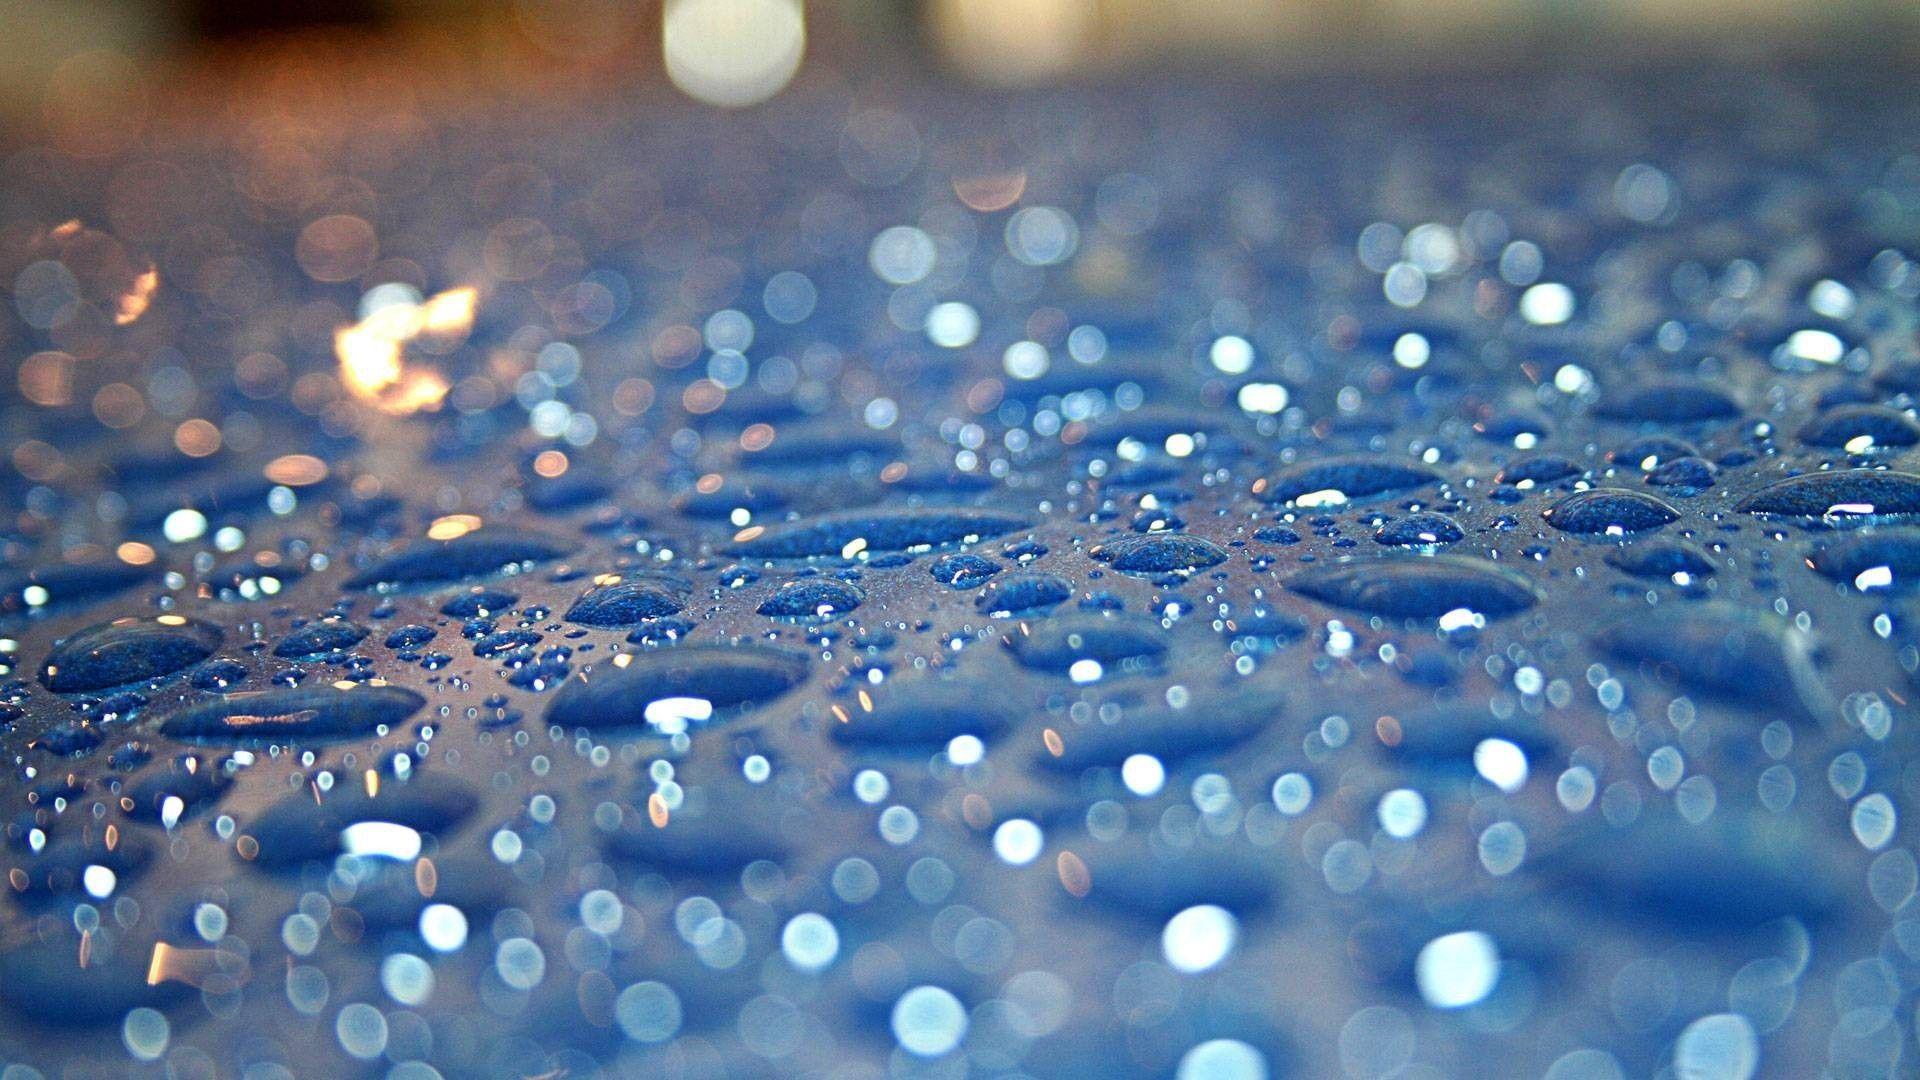 Rainy Wallpaper, Wonderful Picture of Rainy High Quality. D